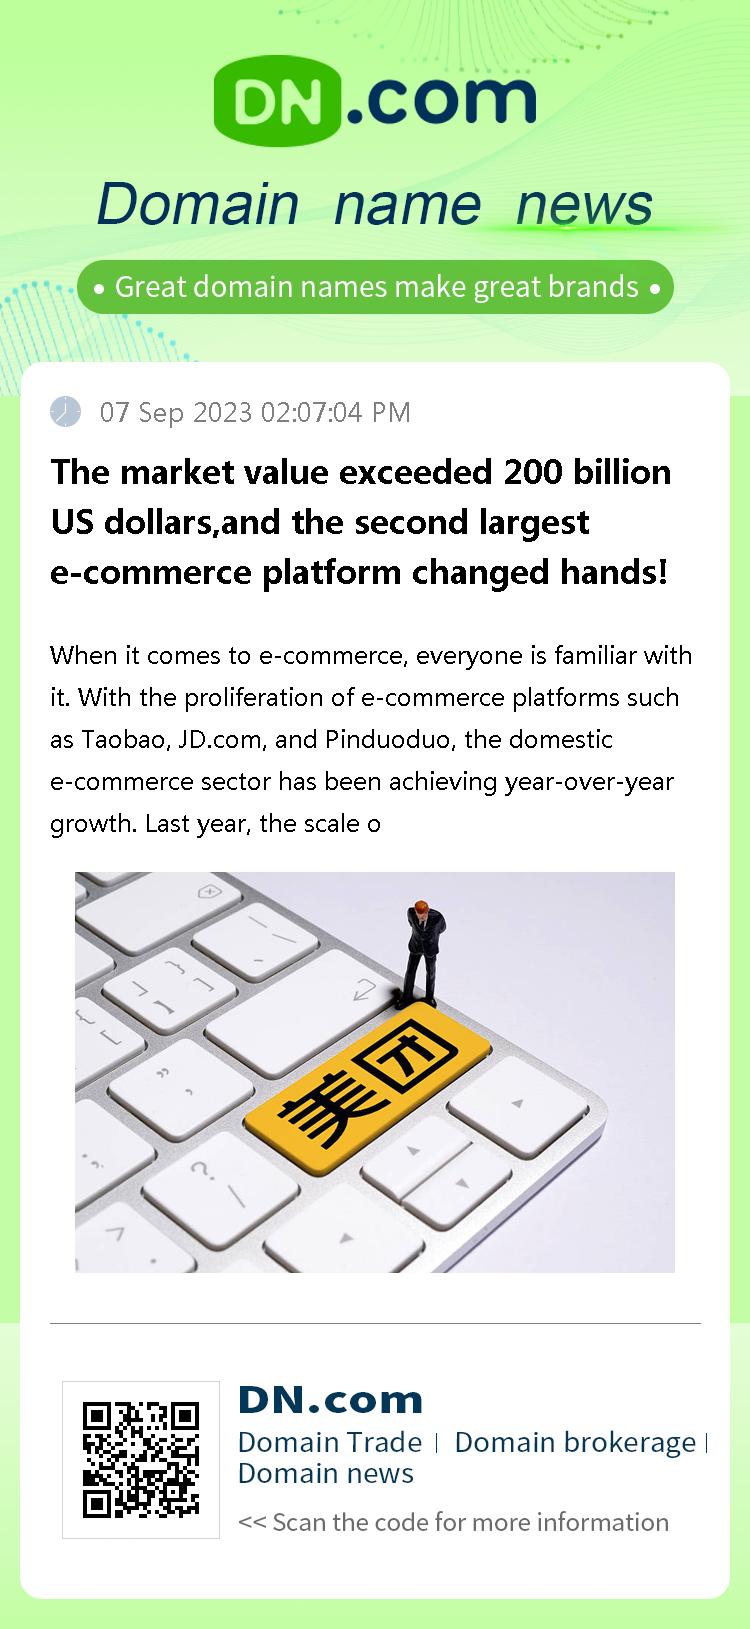 The market value exceeded 200 billion US dollars,and the second largest e-commerce platform changed hands!